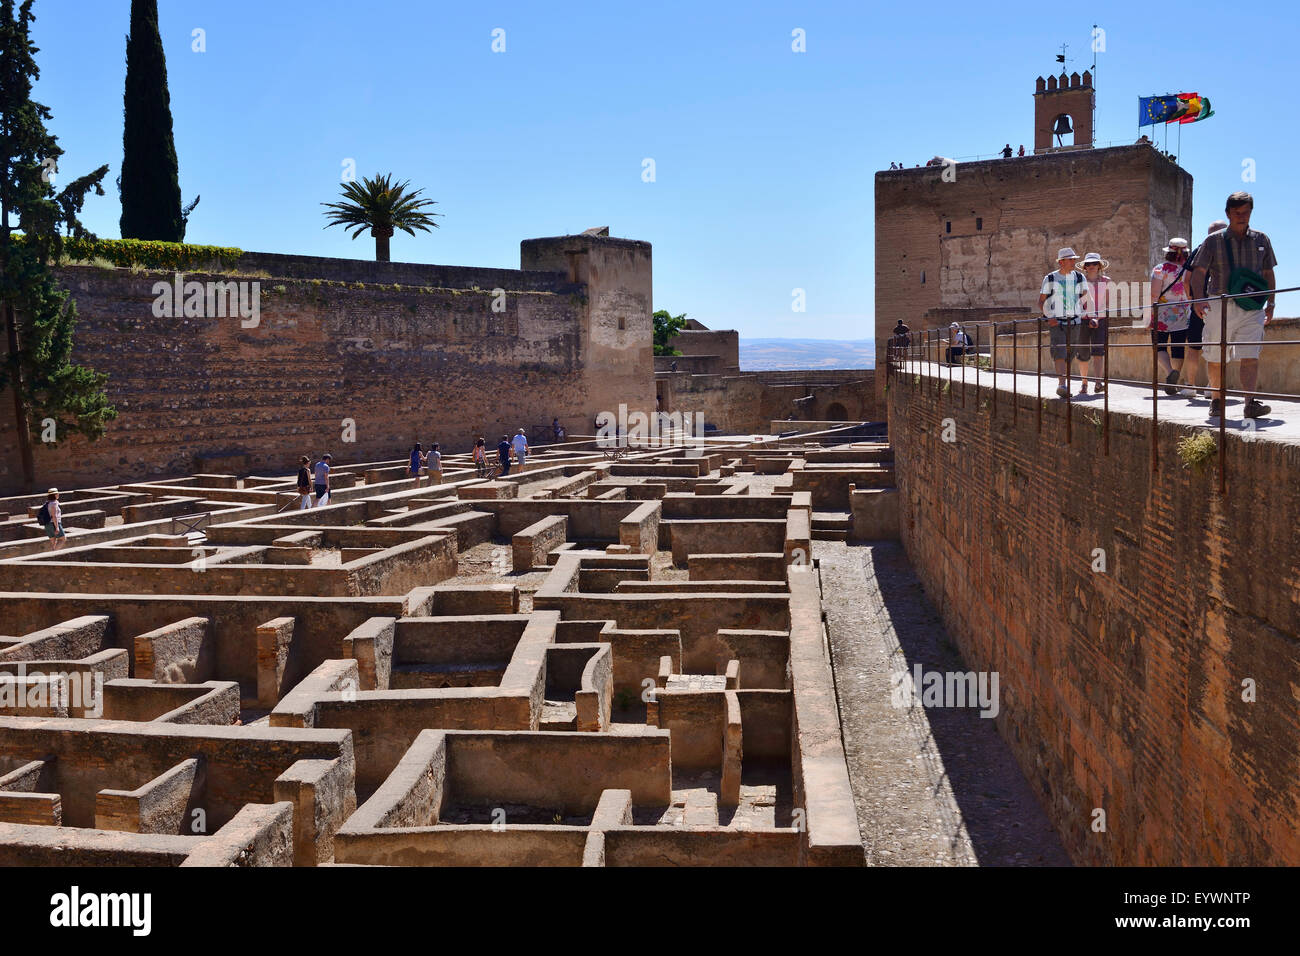 View of Plaza de Armas and Torre de la Vela (Watch Tower) in Alcazaba, Alhambra Palace complex, Granada, Andalusia, Spain Stock Photo